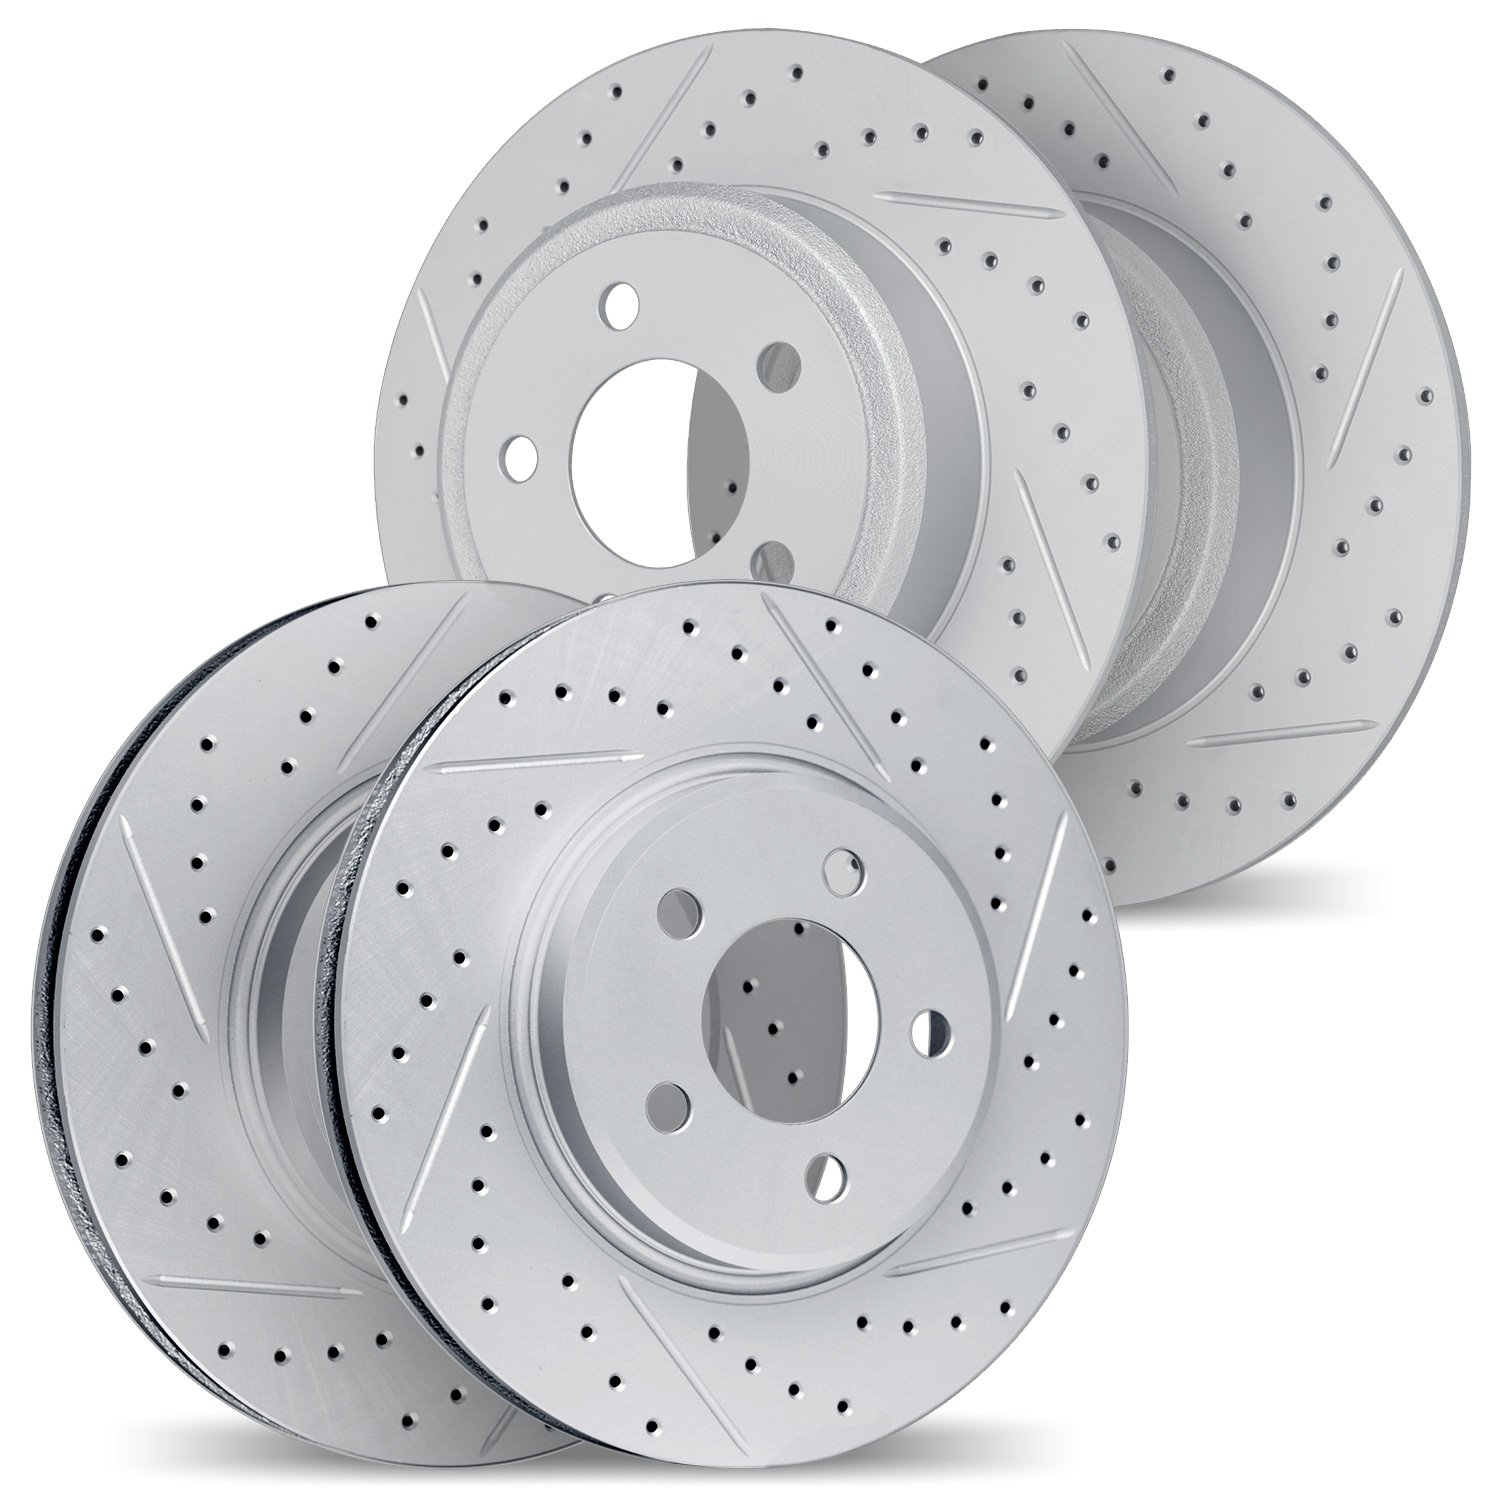 2004-03056 Geoperformance Drilled/Slotted Brake Rotors, Fits Select Kia/Hyundai/Genesis, Position: Front and Rear